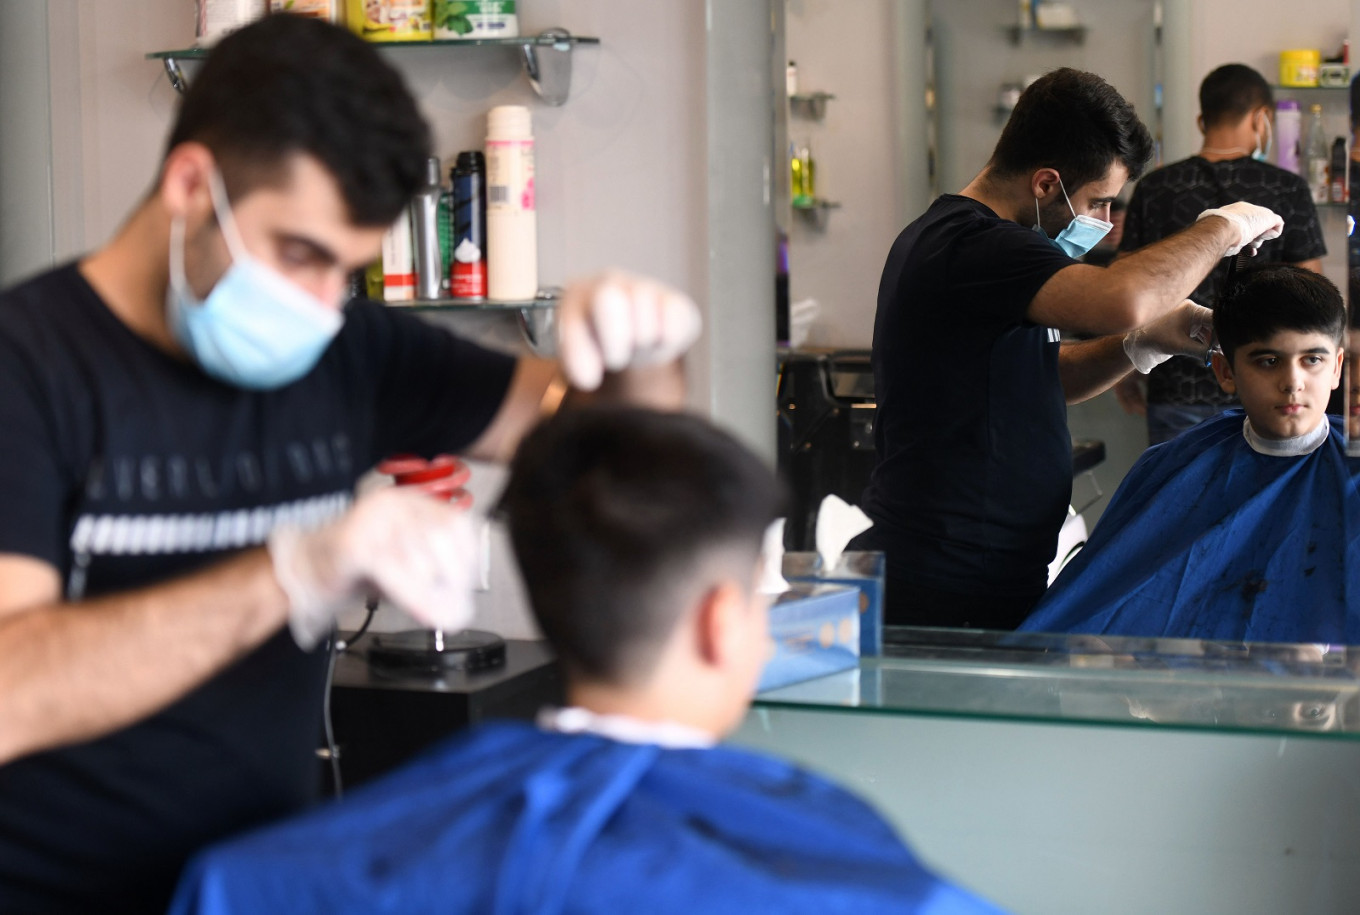 Trim for Eid: Qatar barbers and salons reopen - Lifestyle - The Jakarta Post